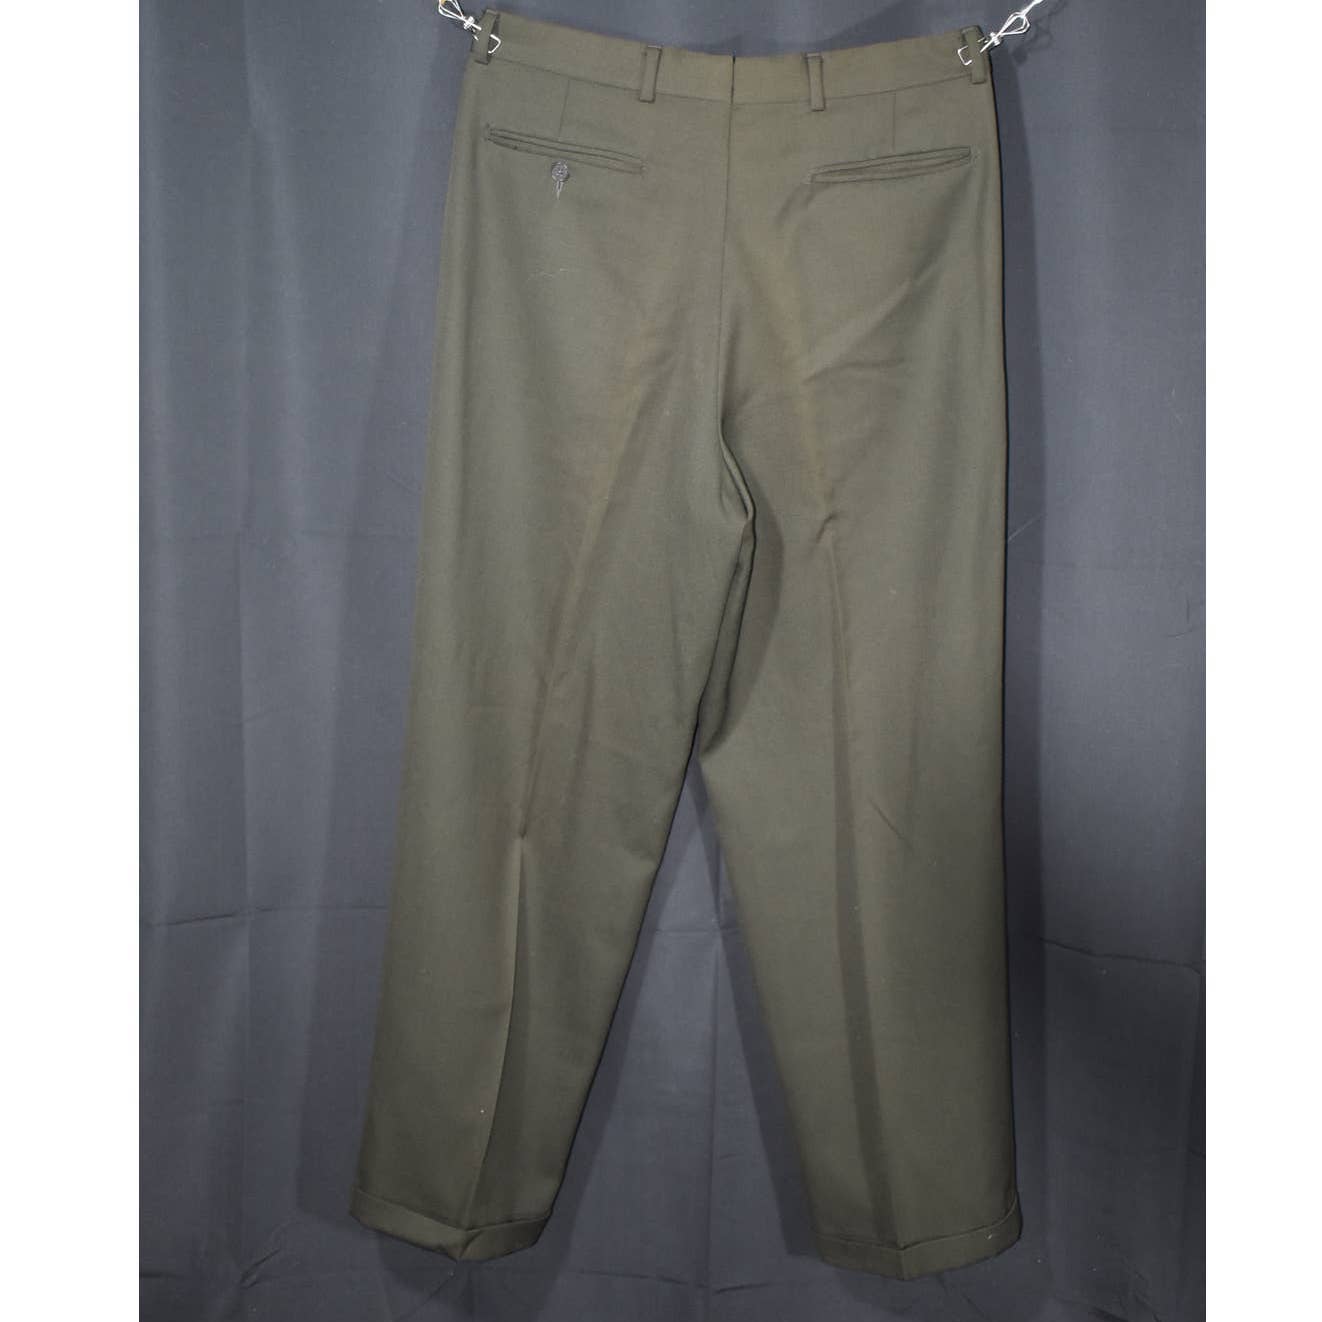 Vintage Monsieur by Givenchy Dark Green pleated Pants- 32R